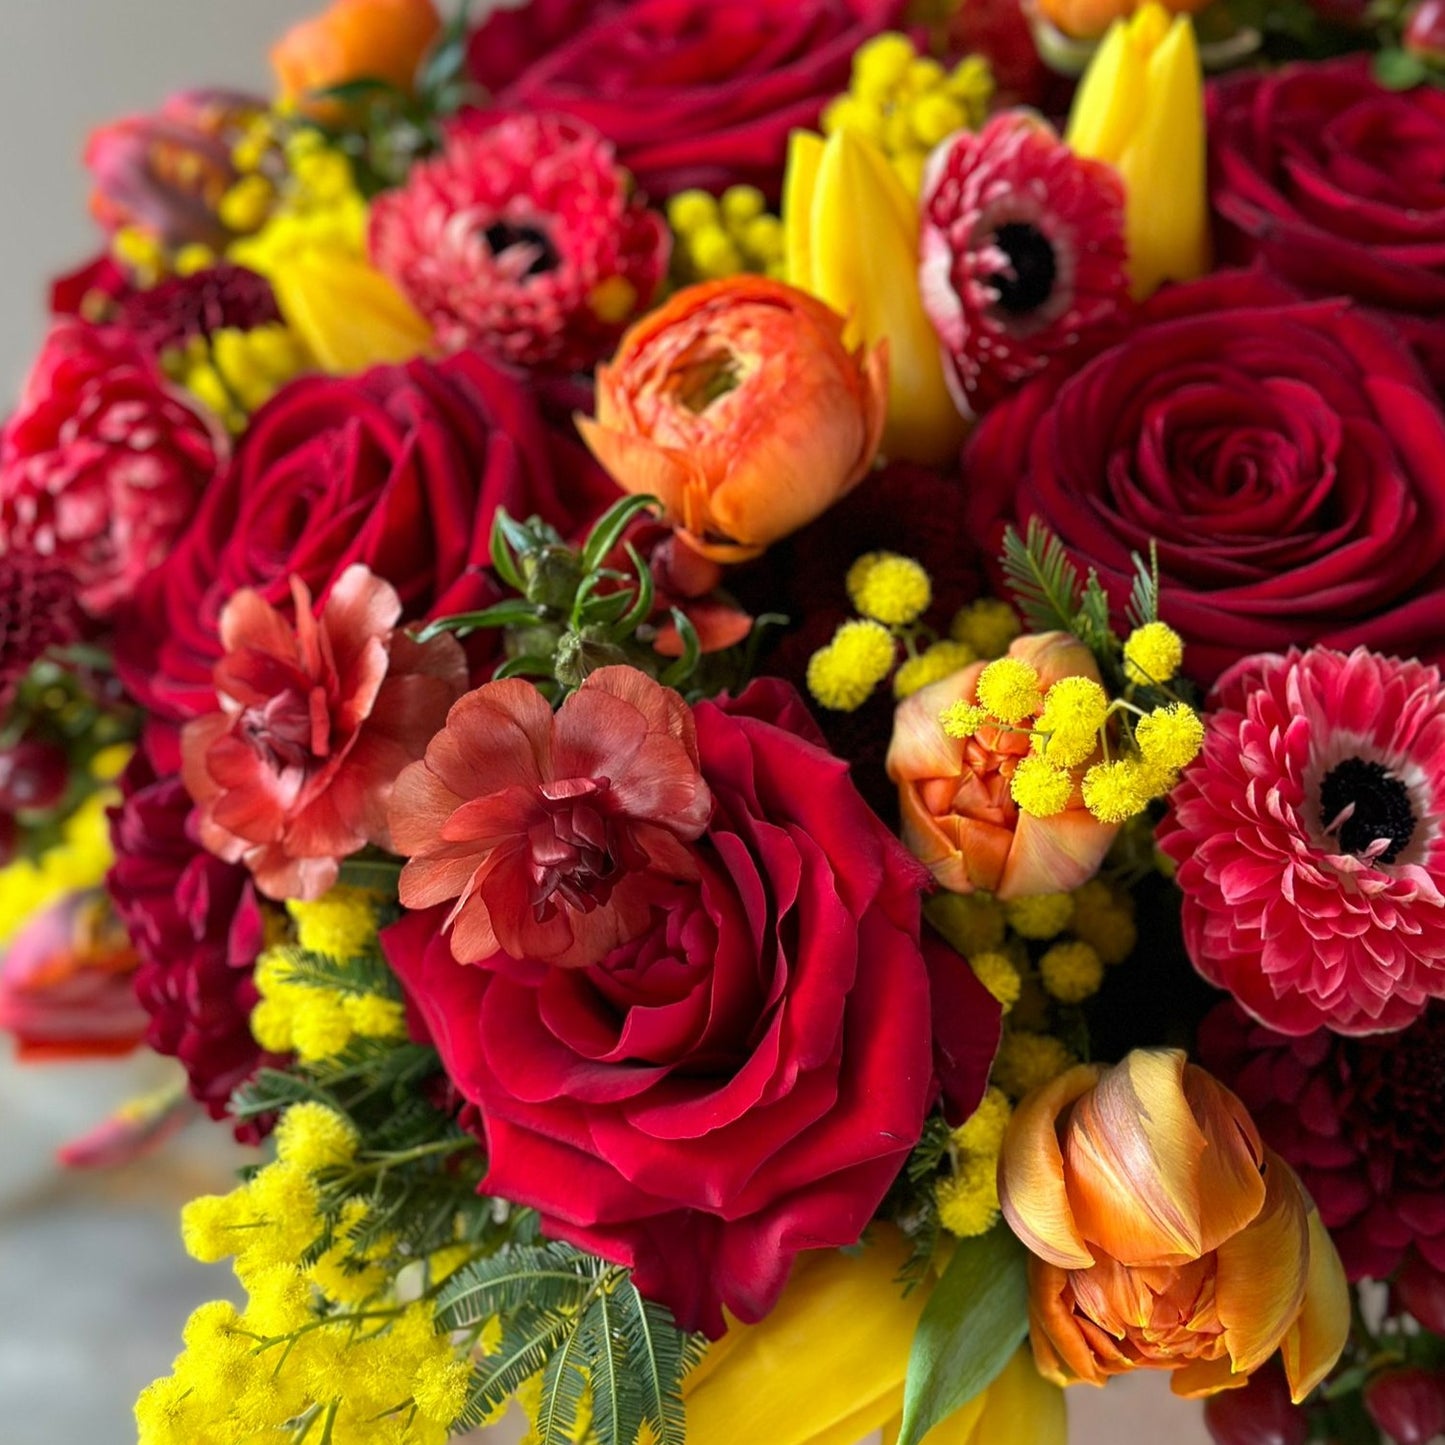 Lunar New Year - Pulbrook & Gould Flowers London